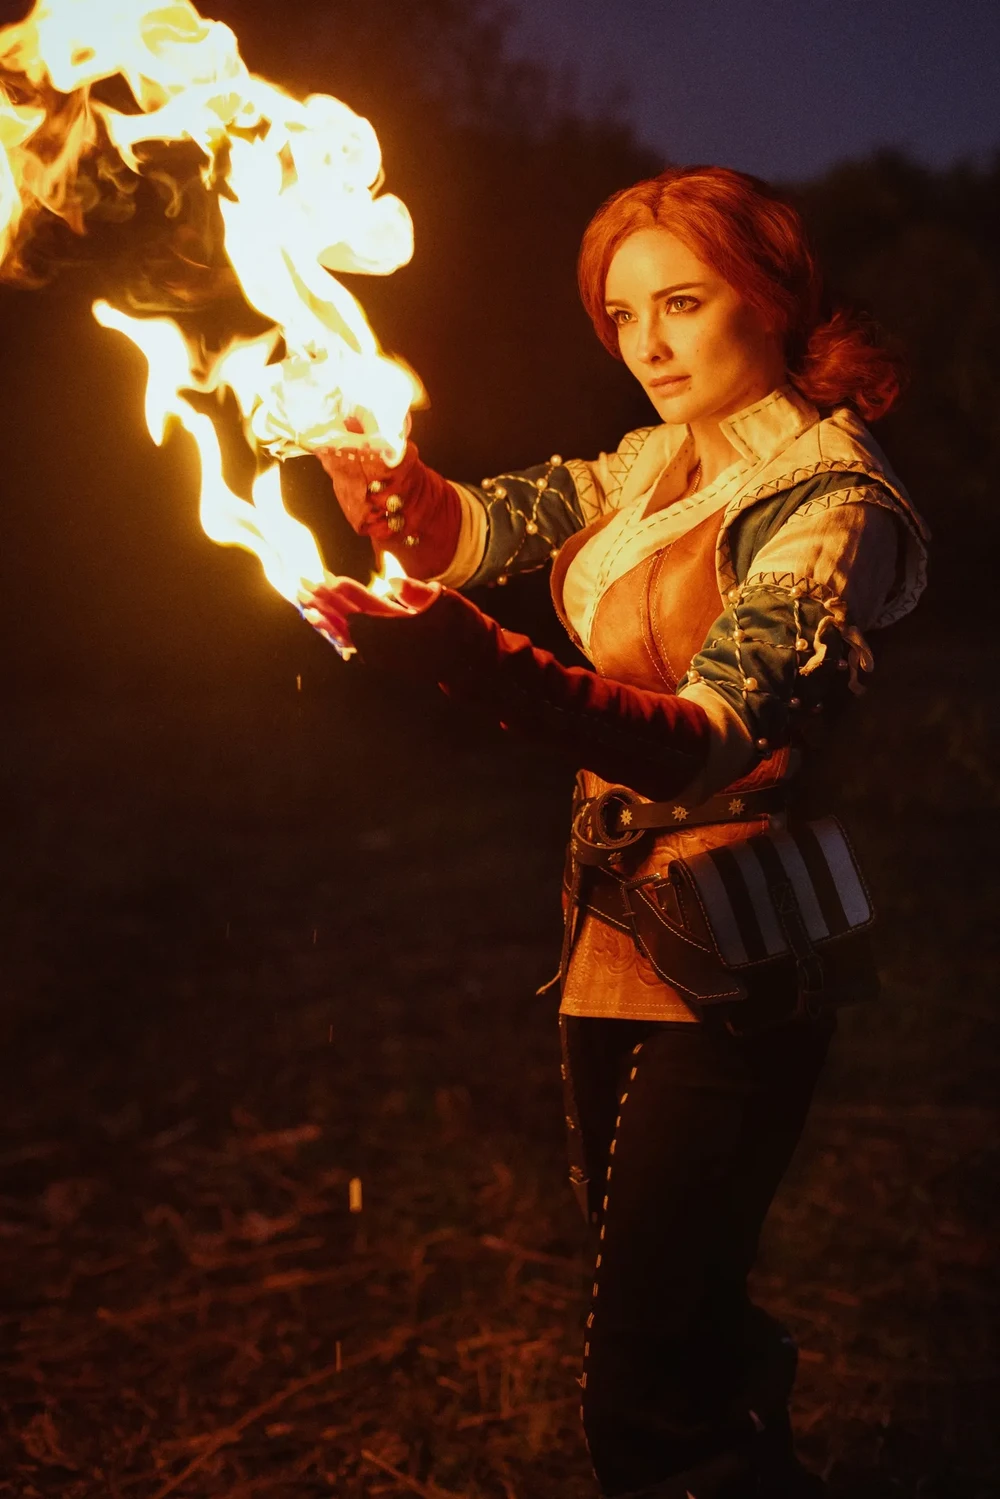 Cosplay on Triss Merigold: KATSSBY model Letyago recreated the image from The Witcher 3 #0